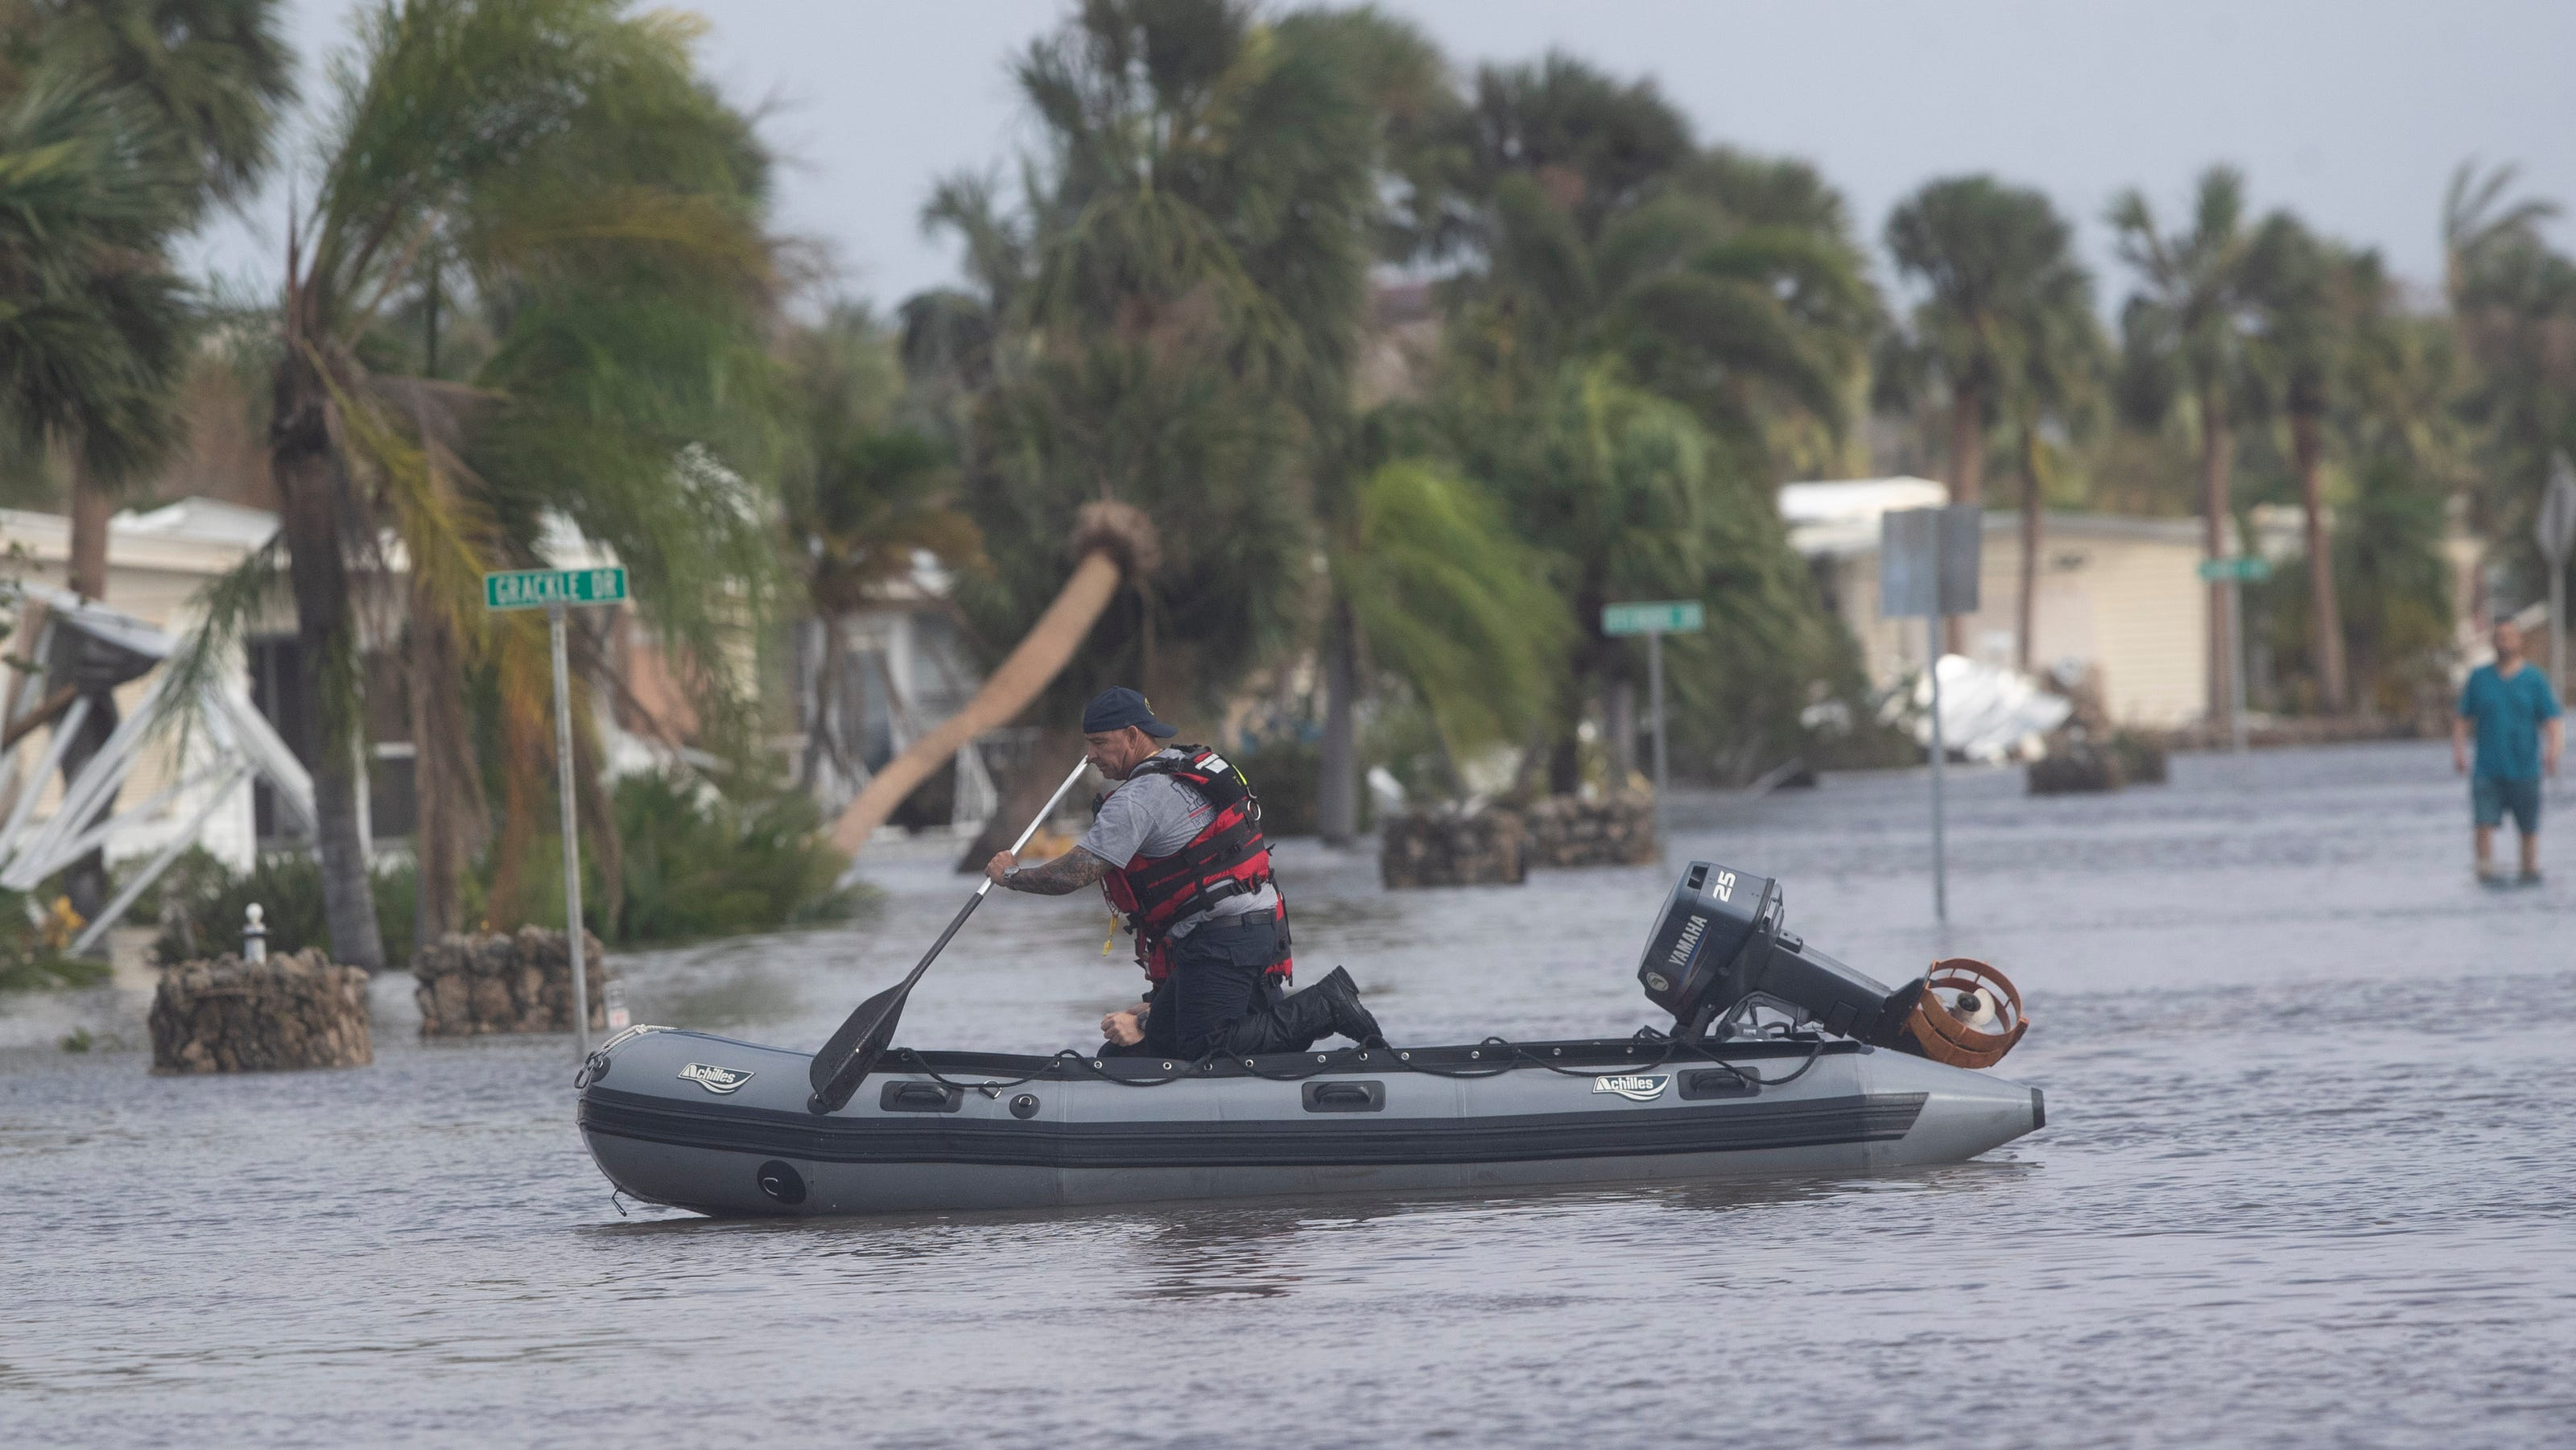 Lee County gives updates on Hurricane Ian aftermath, search, rescue - News-Press